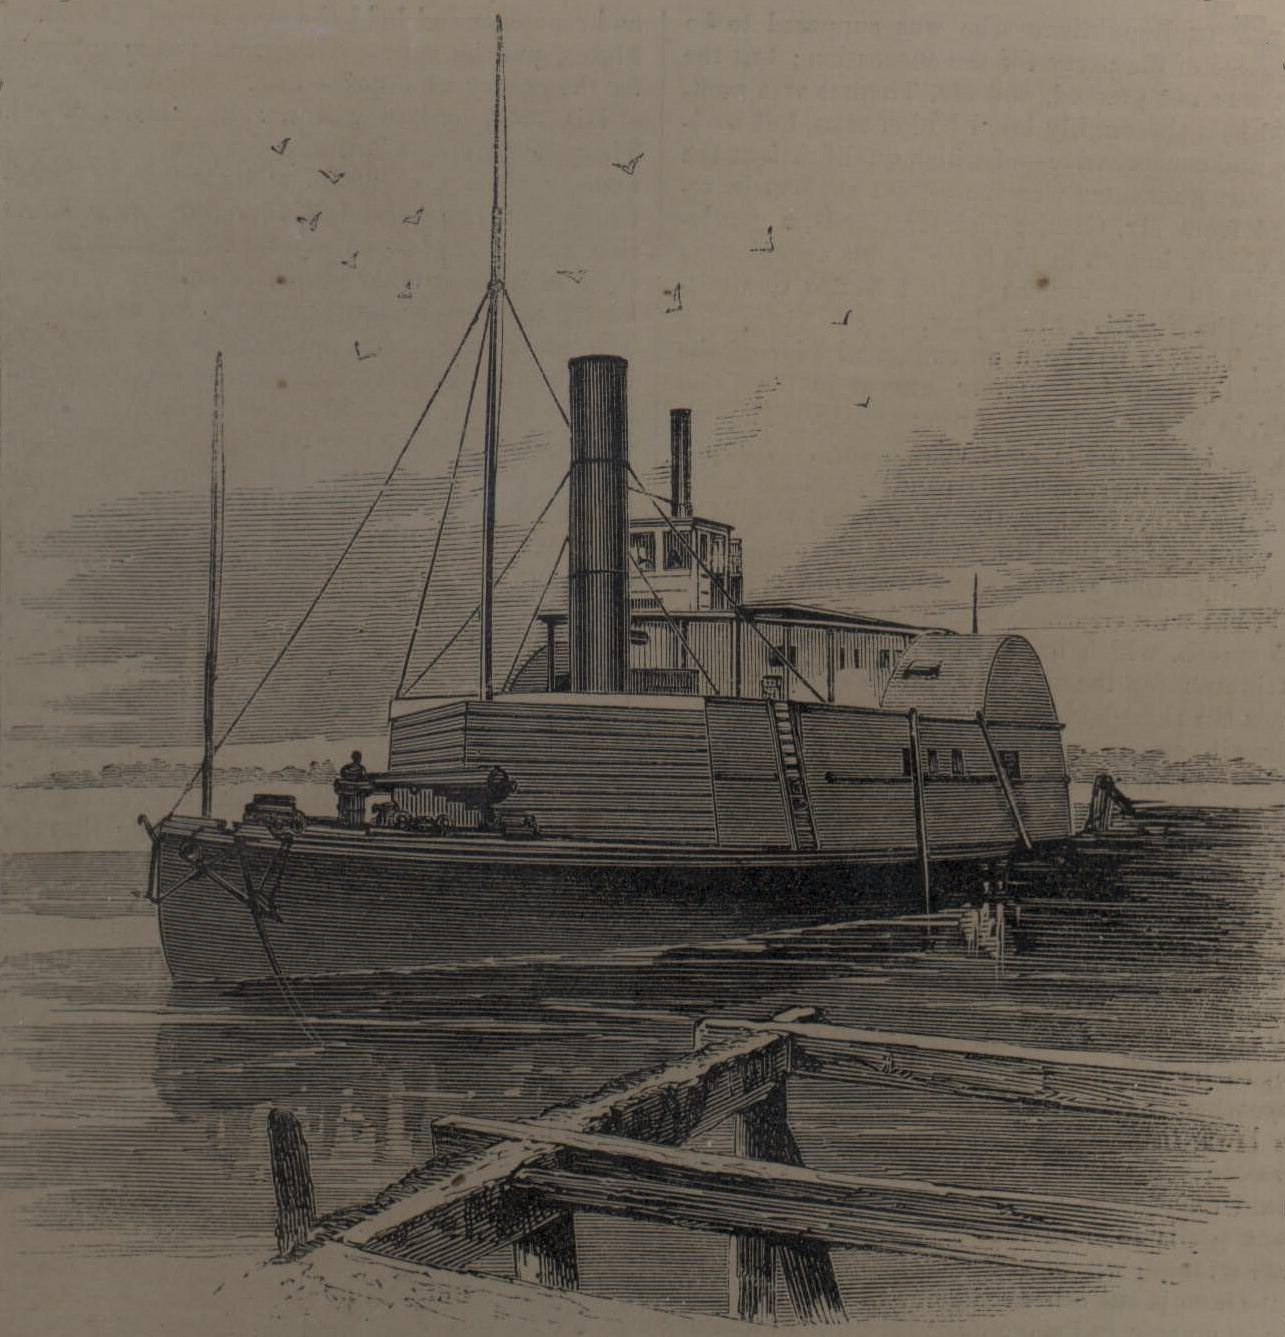 A Harper's Weekly sketch of the gunboat CSS Planter run aground after Smalls' mutiny, May 1862.